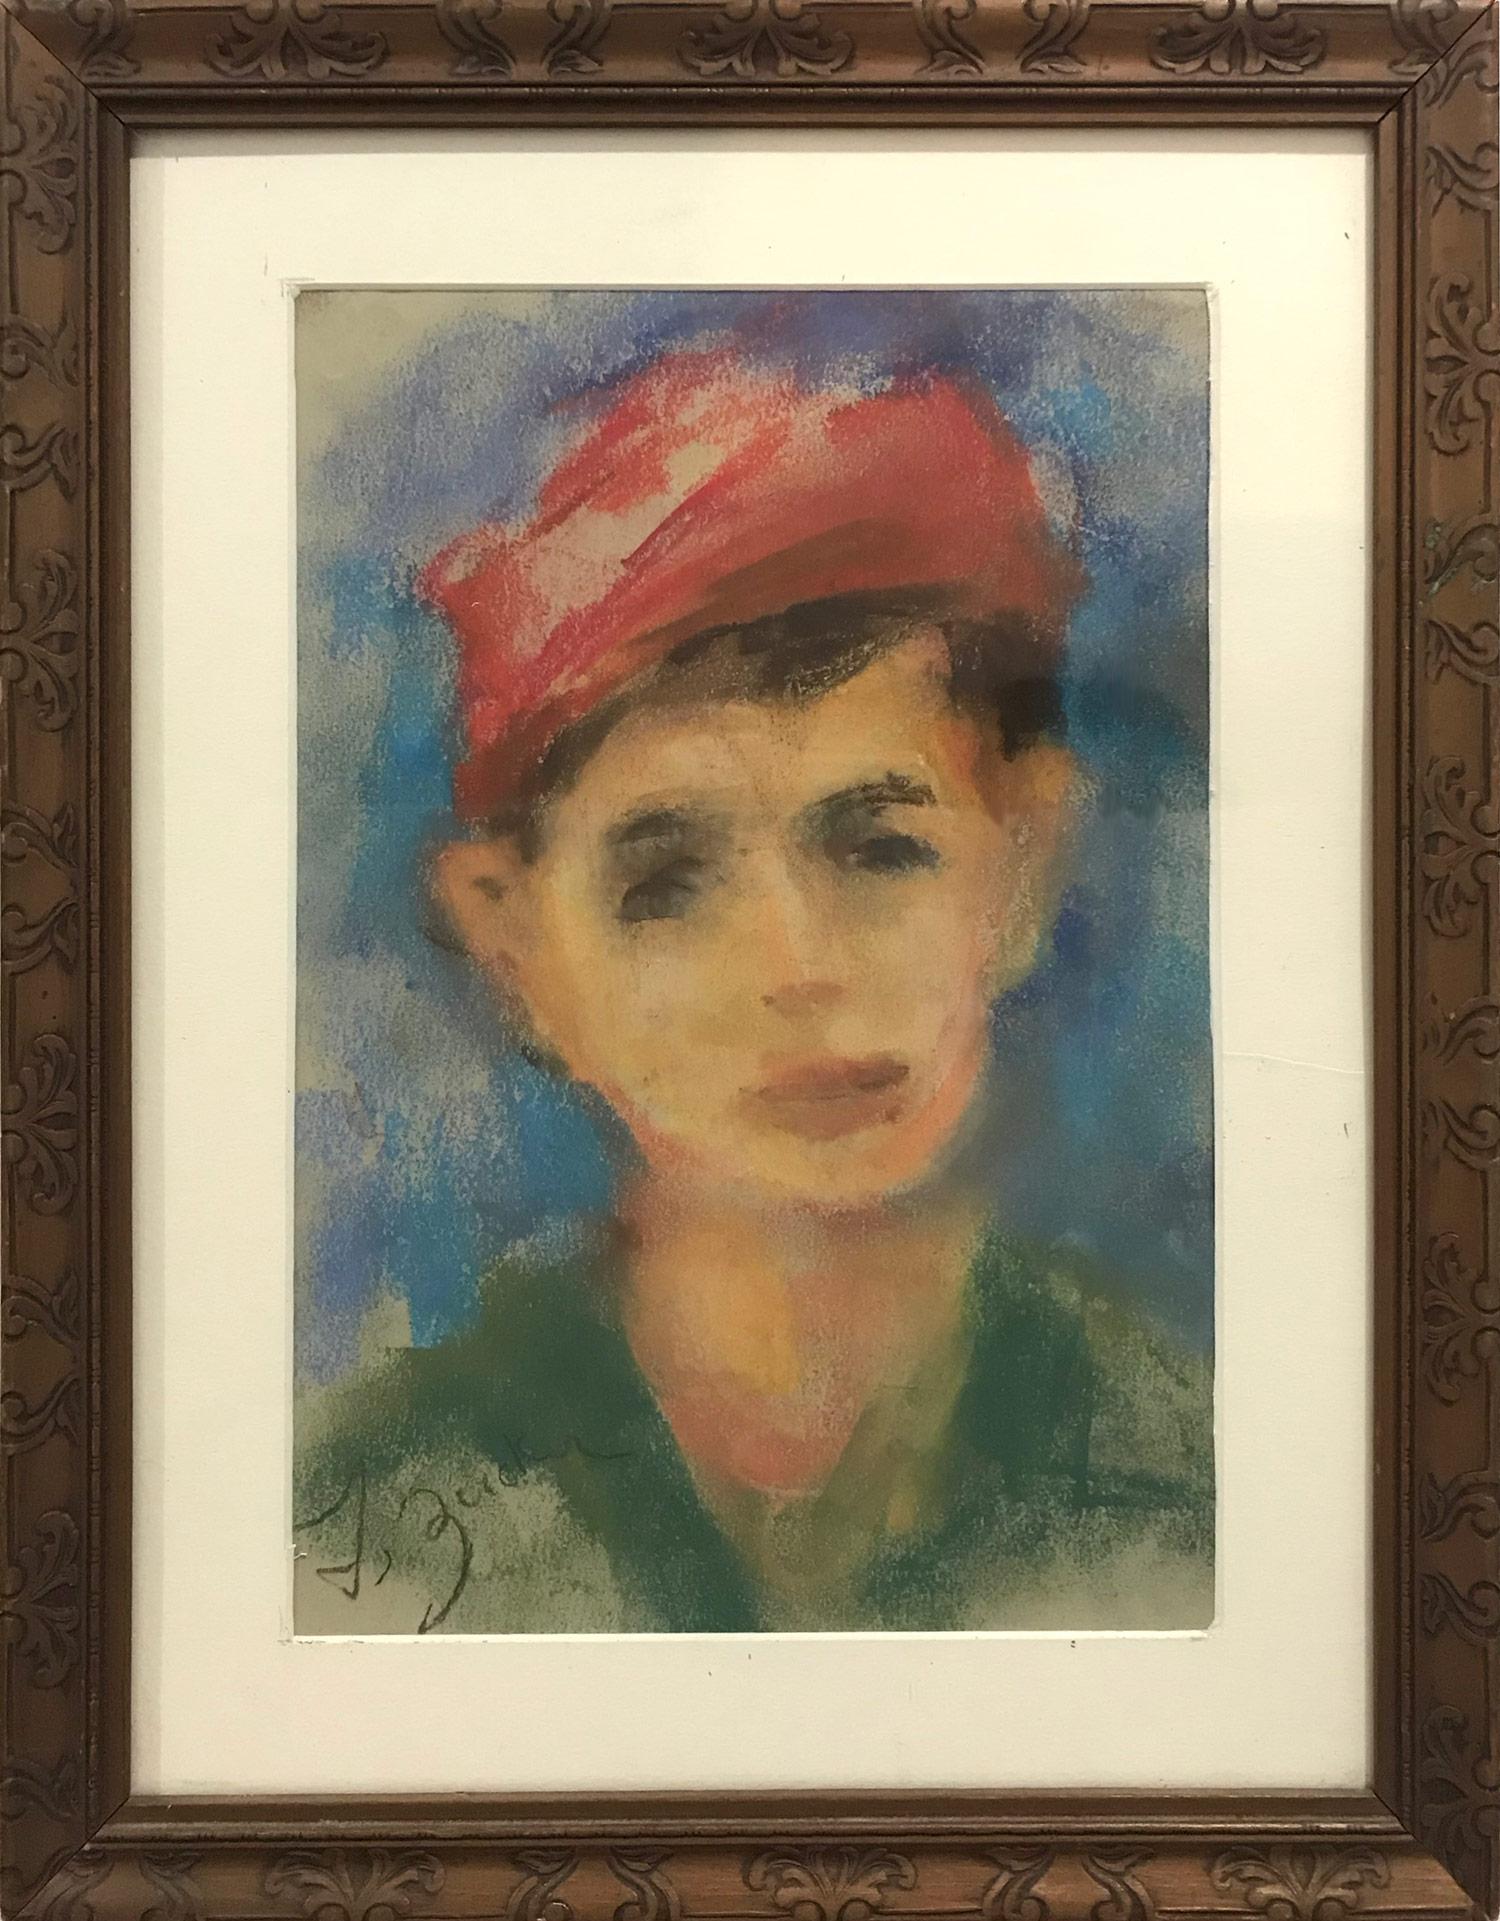 Jacques Zucker Portrait Painting - "Boy with Red Cap" Post-Impressionism French Color Pastel Painting on paper